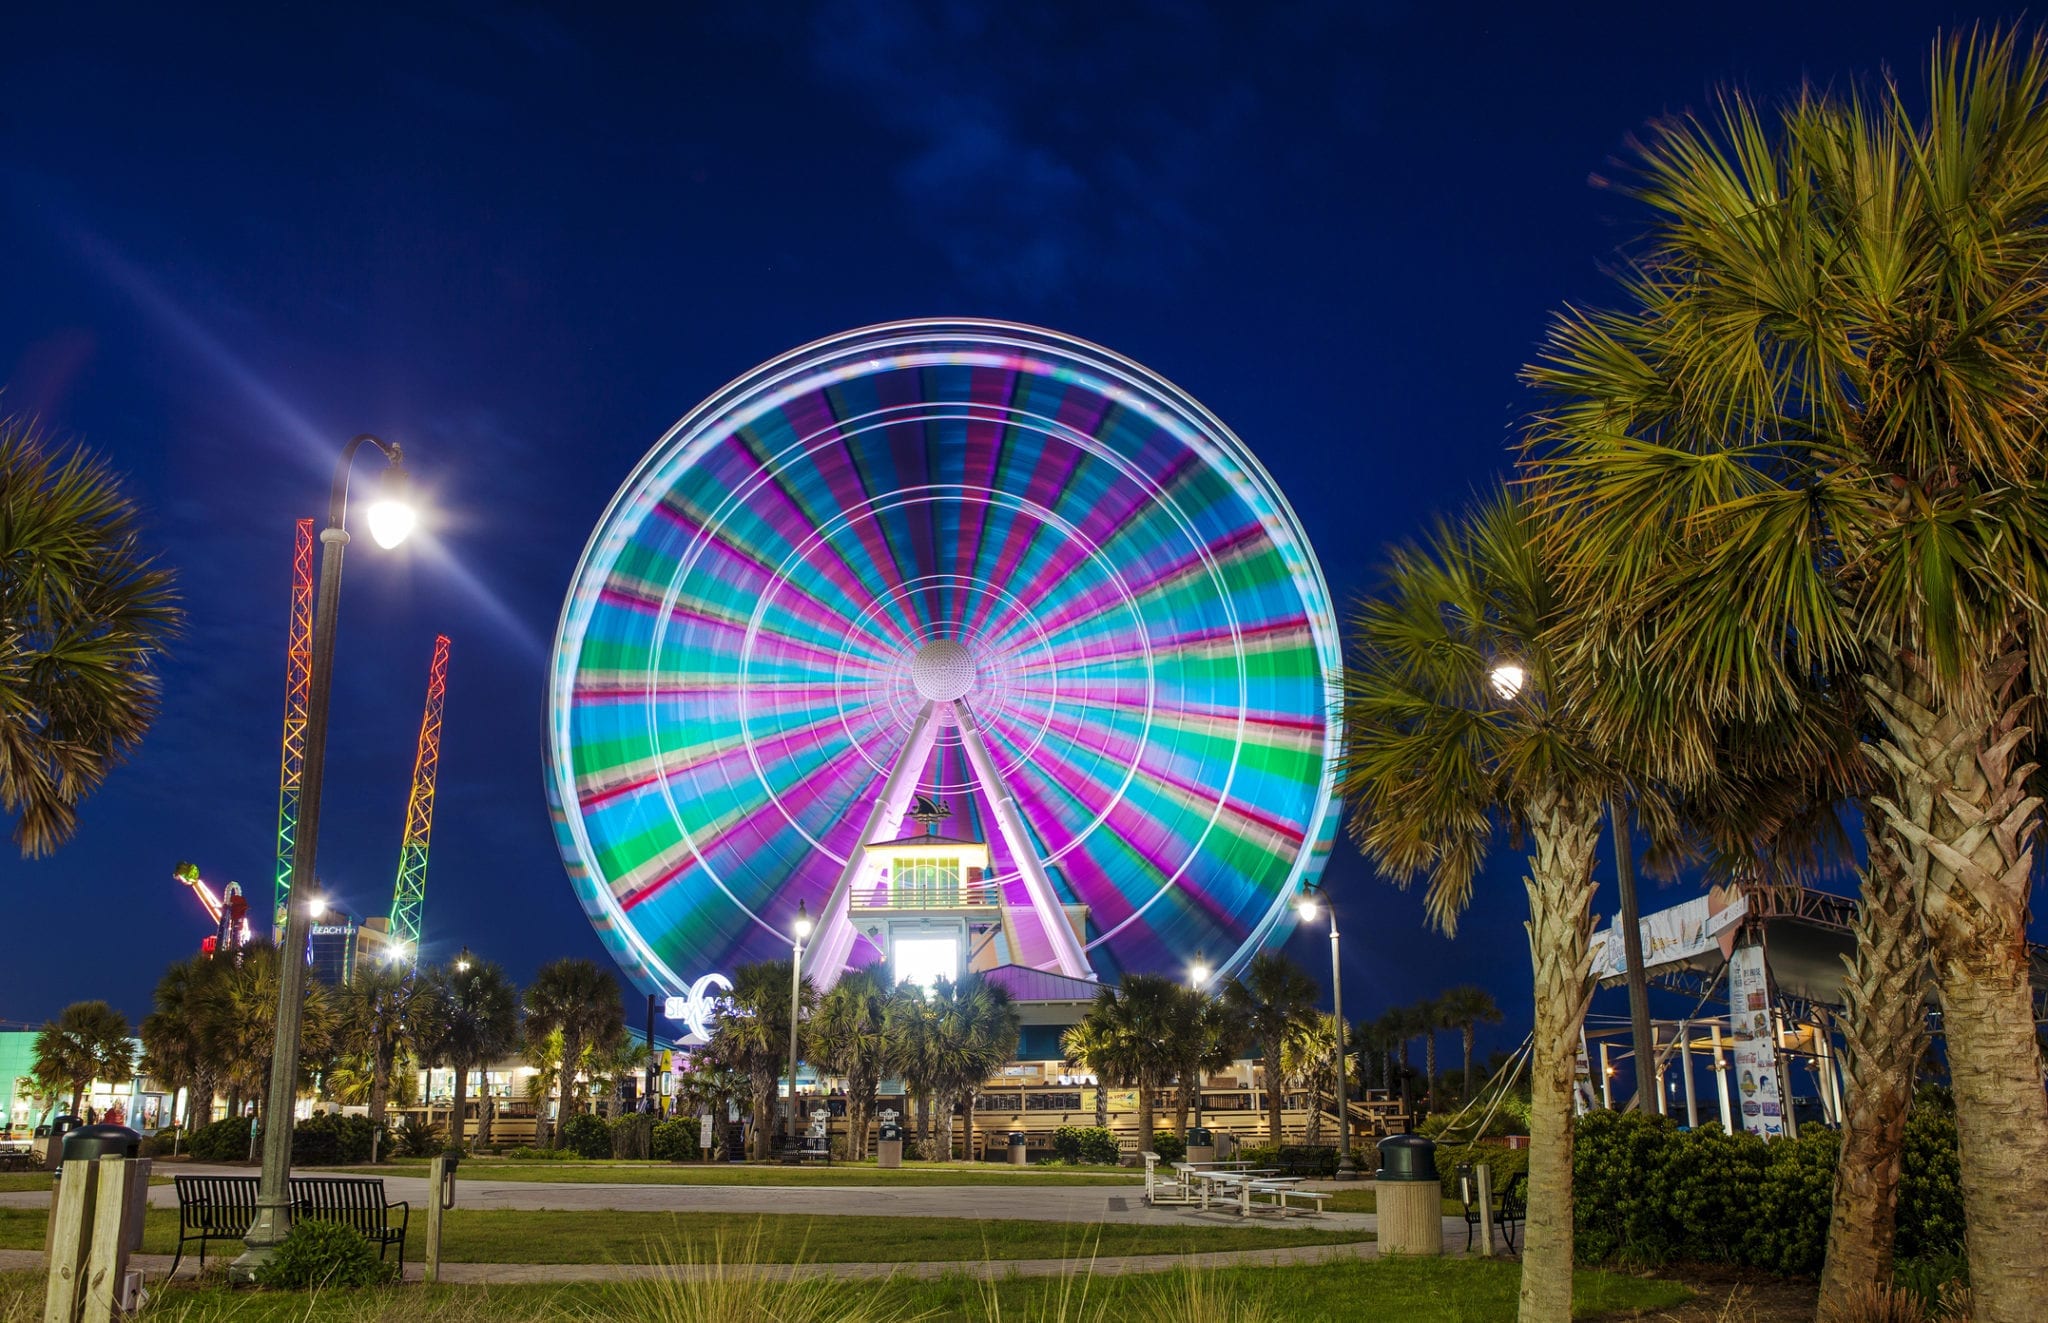 Things to do in myrtle beach at night: skywheel all lit up